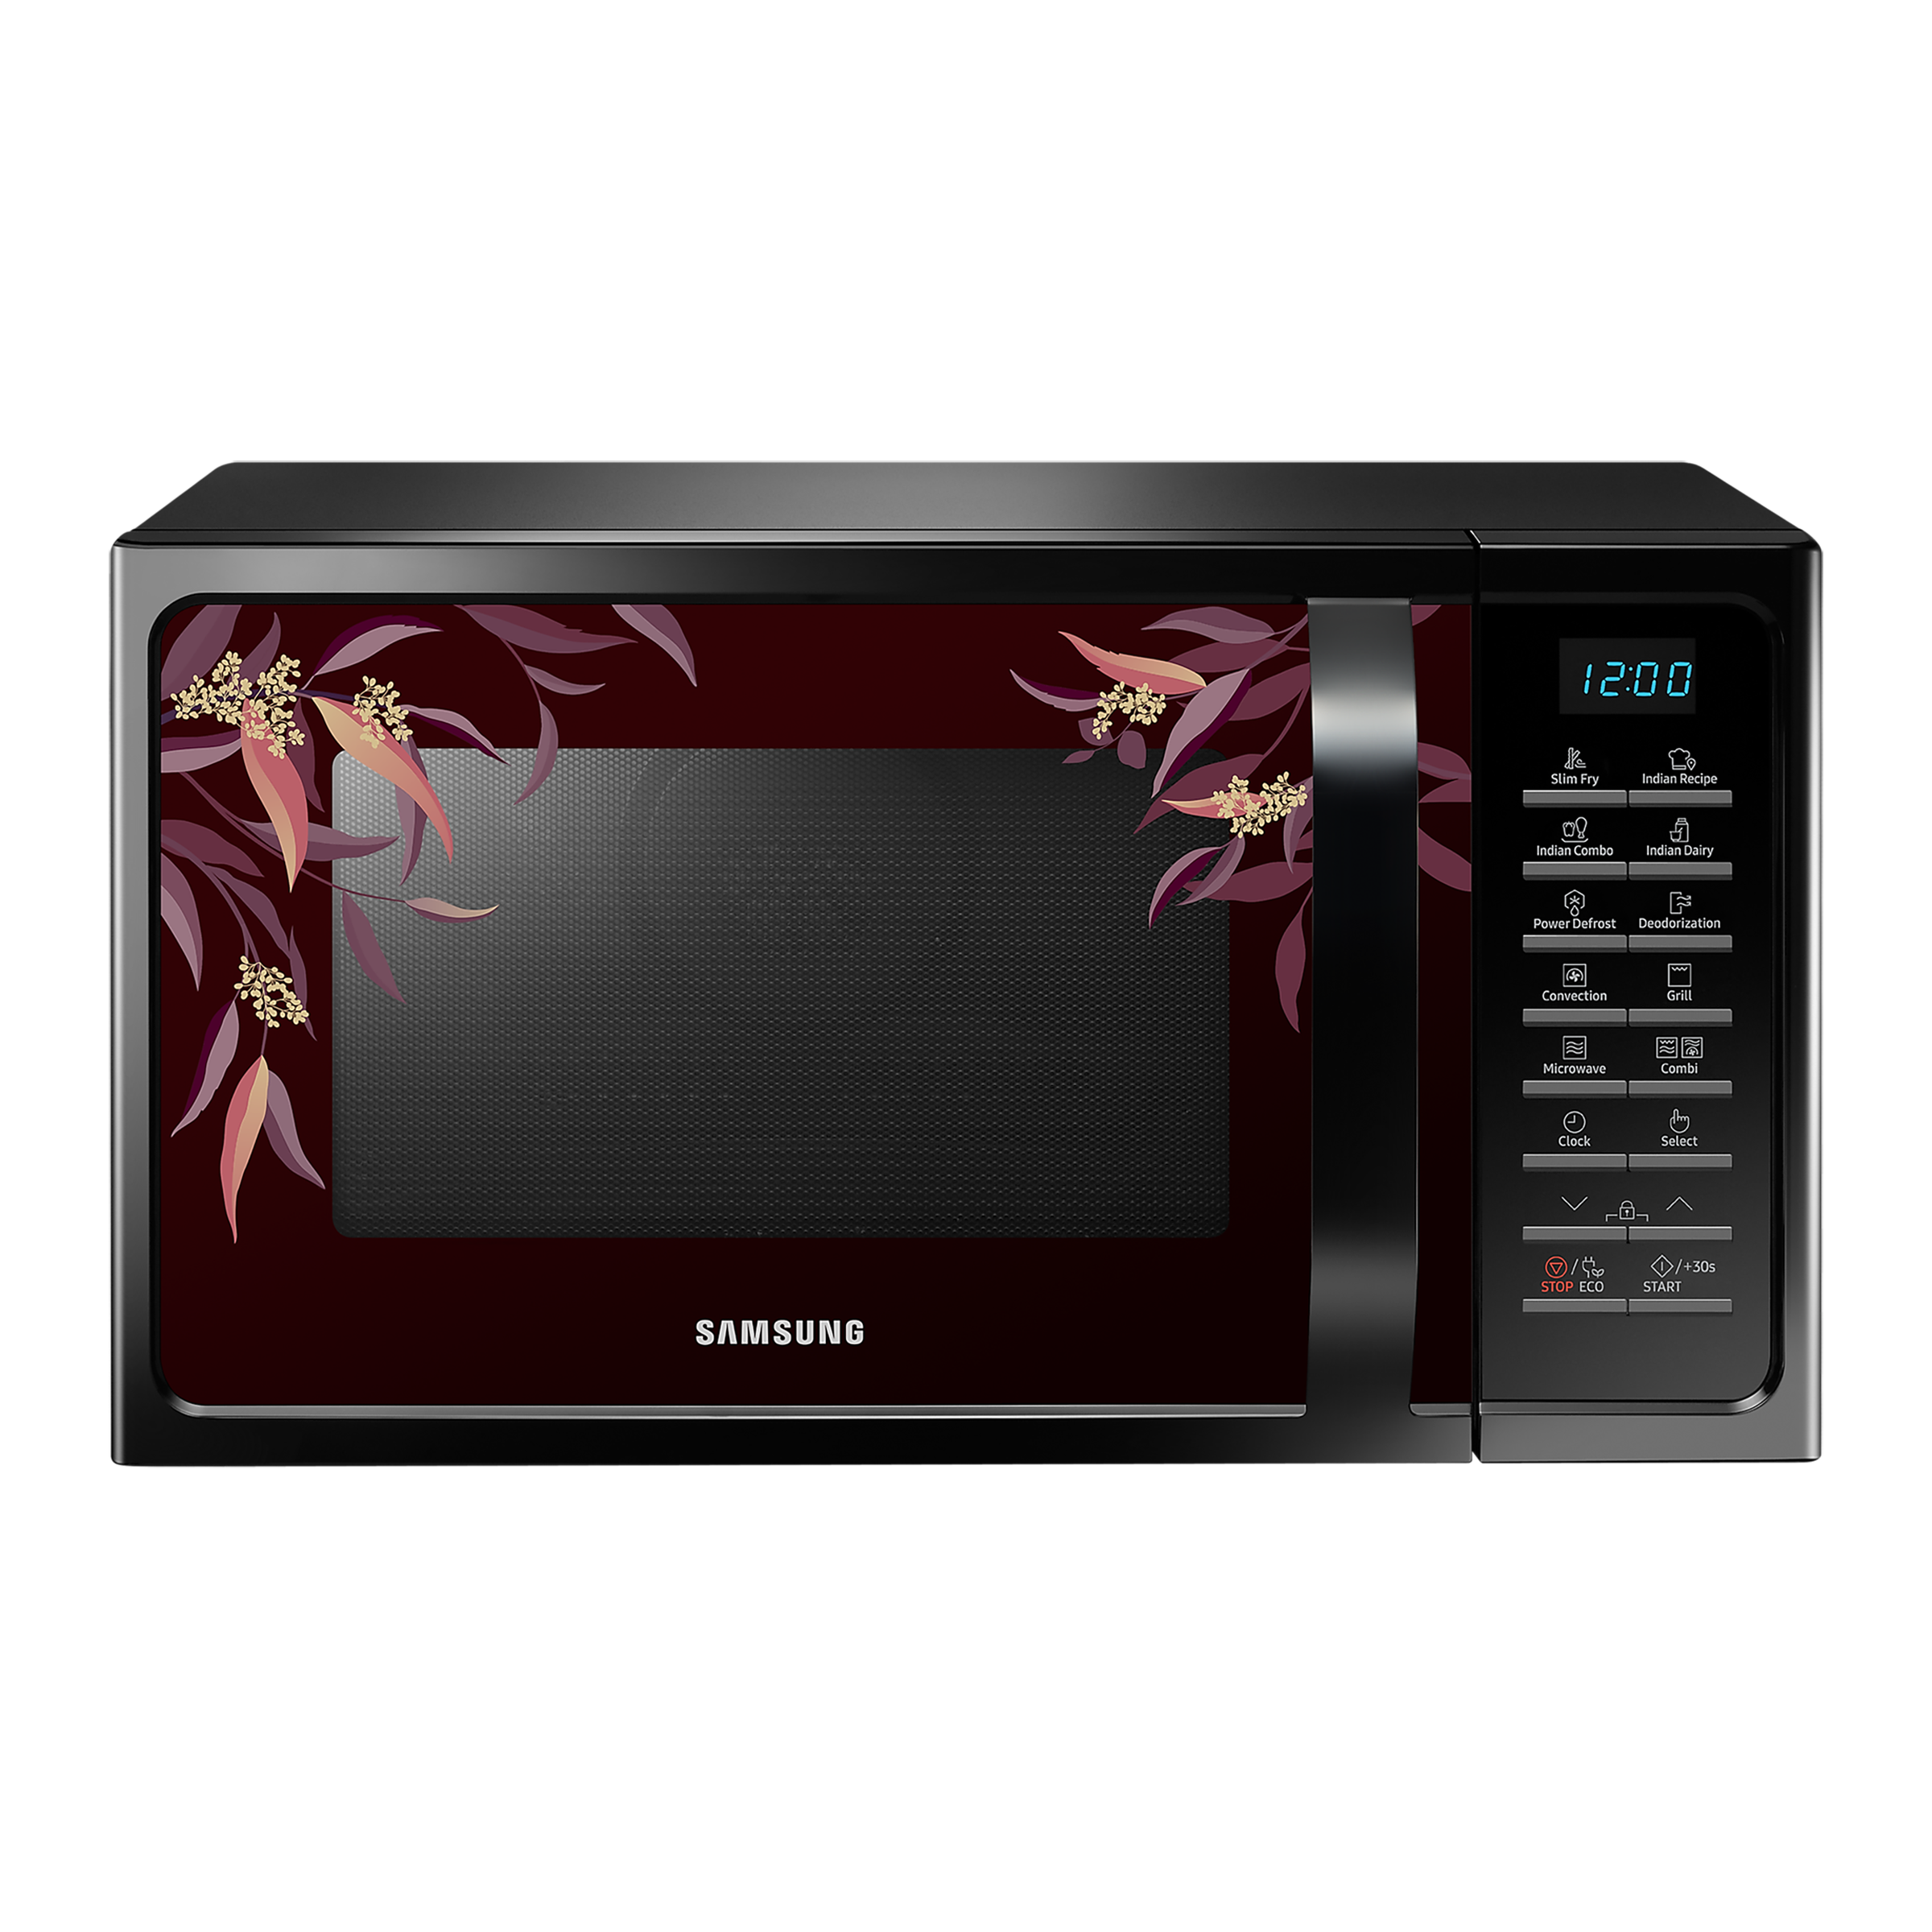 Samsung 28 Litres Convection Microwave Oven (Slim Fry Technology, MC28H5025VR/TL, Delight Red/Black)_1